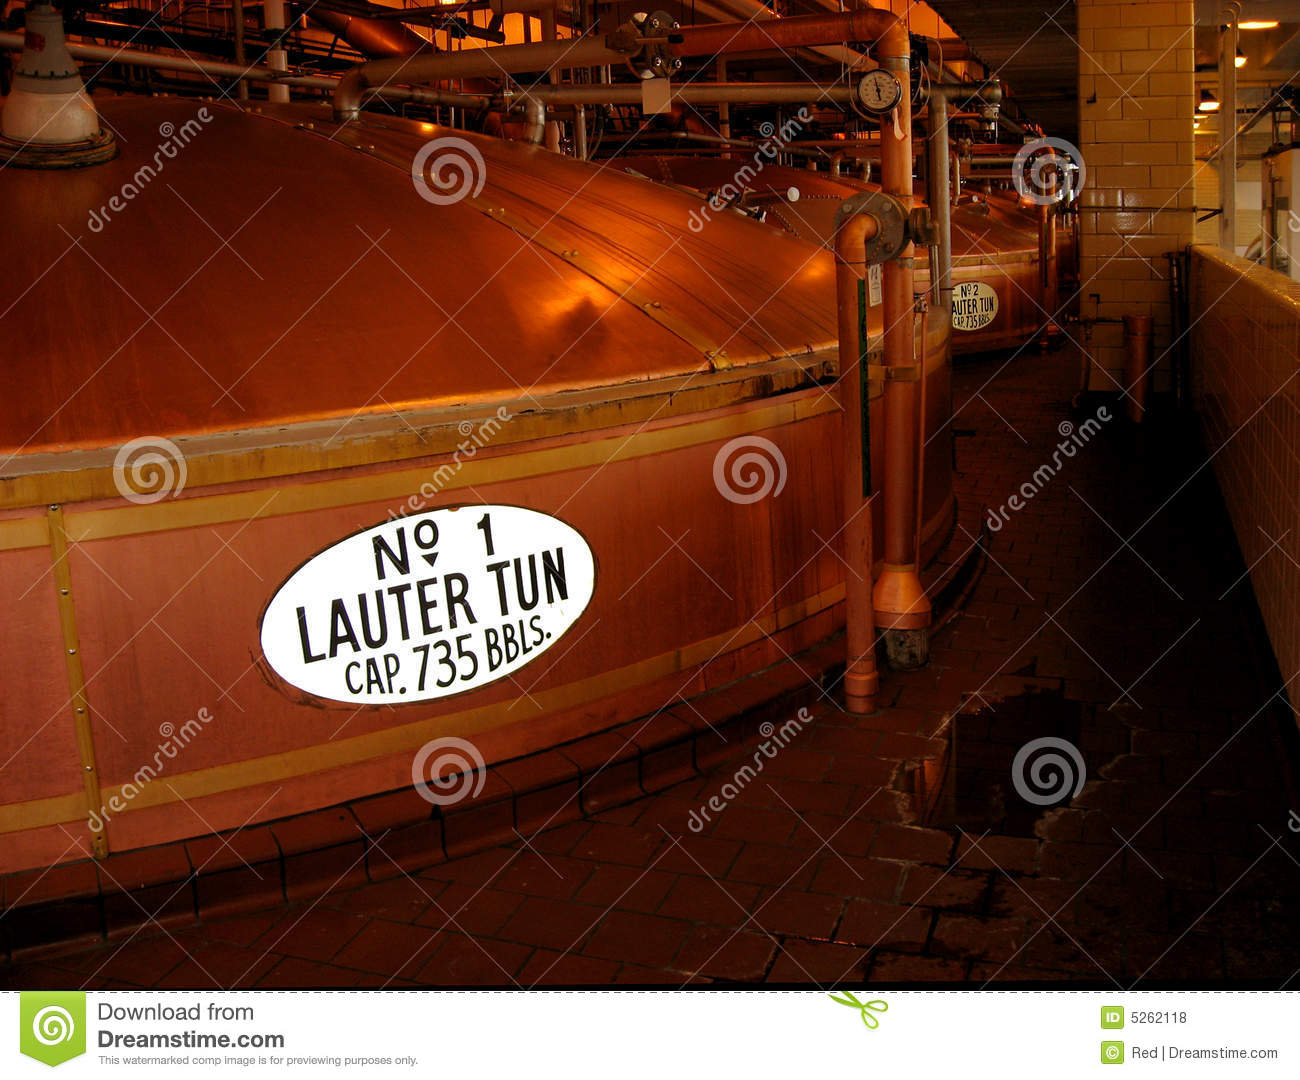 Sabmiller  This Large Copper Vessel In Milwaukee Wisconsin Brewery  A    